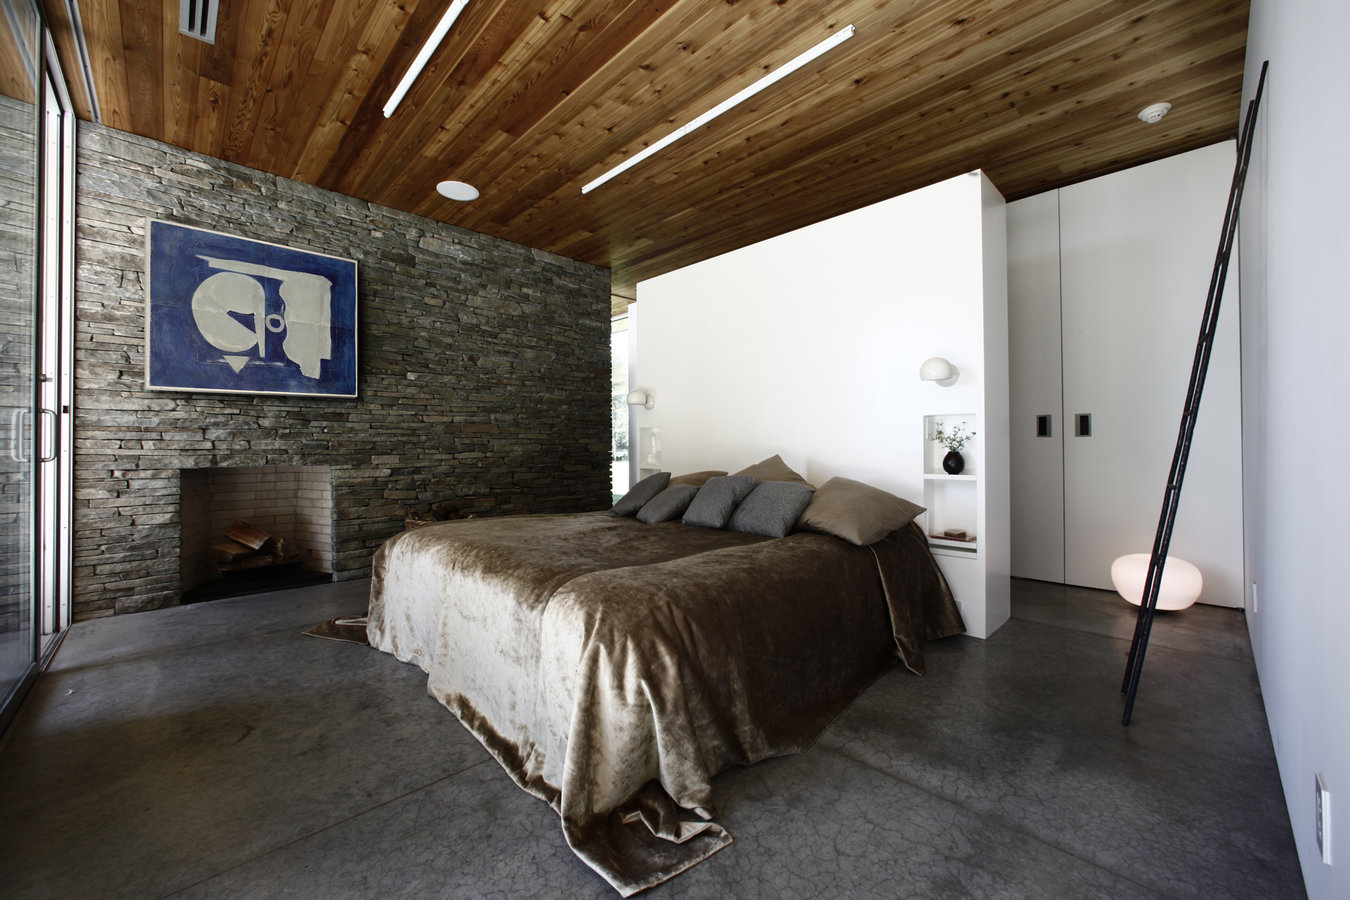 Bedroom with stone wall, fireplace, blue and white art, cedar ceiling, white walls, concrete floor and bed with velvet cover.